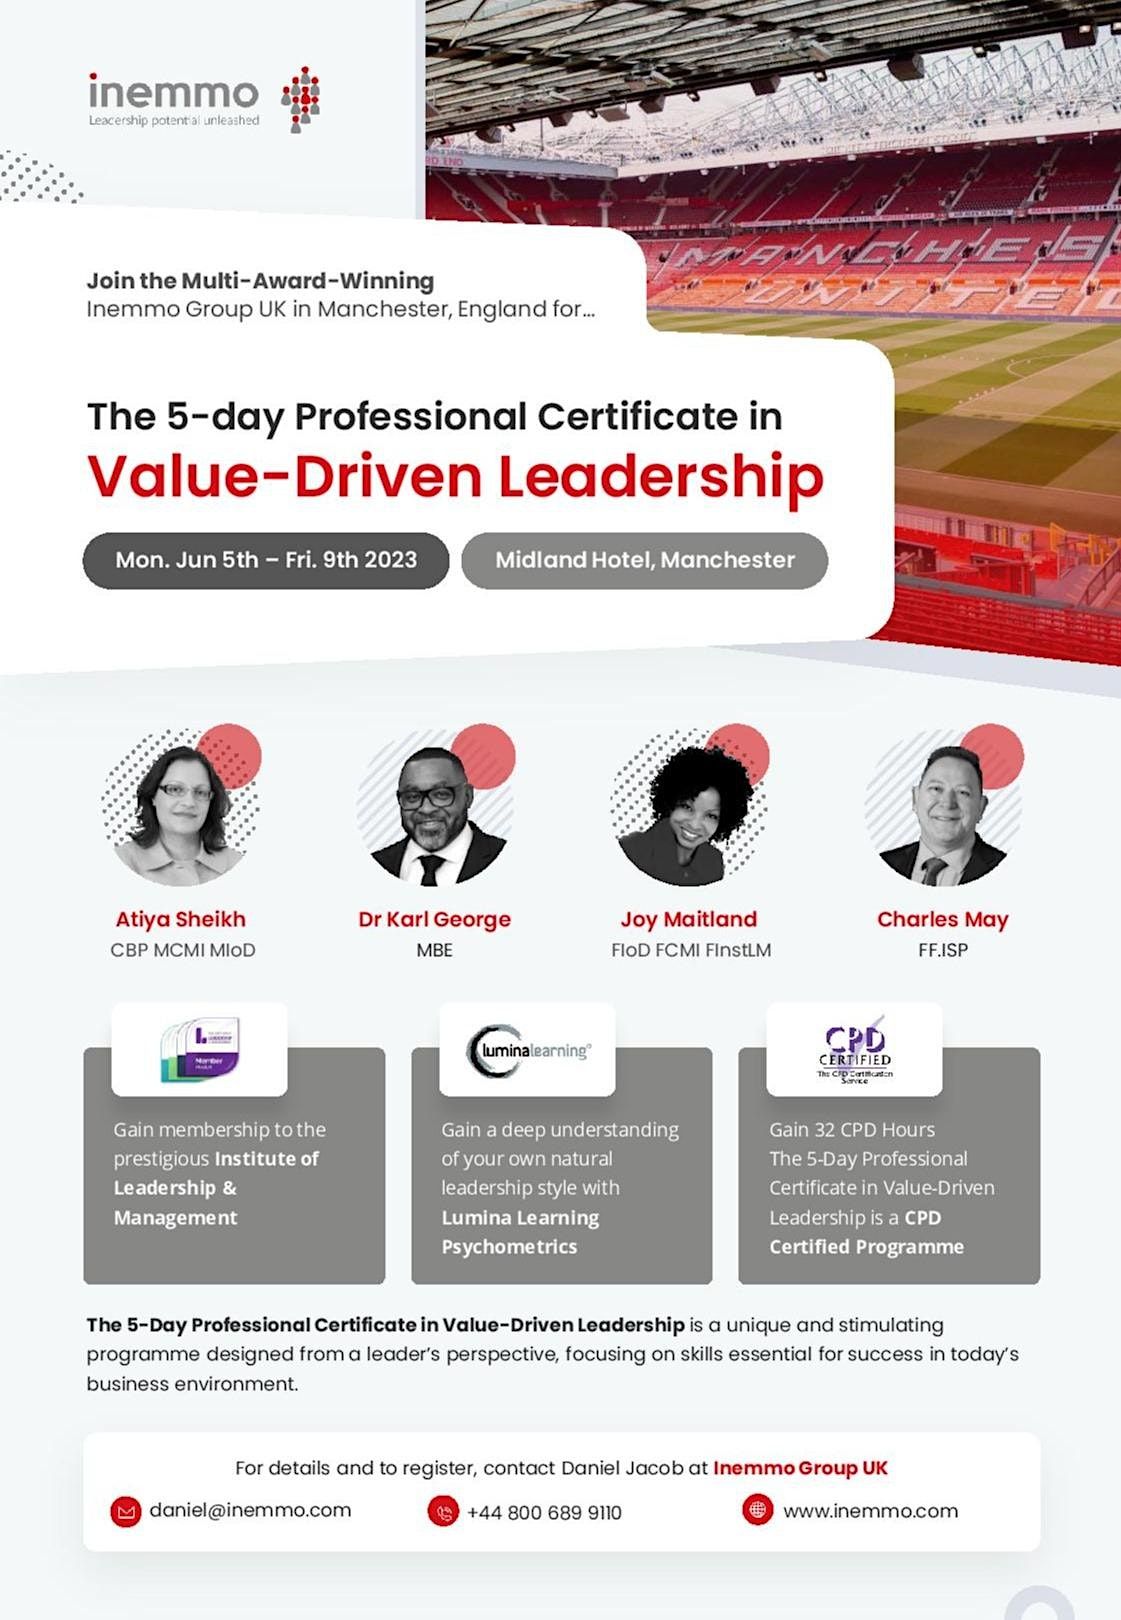 5 Day Professional Certificate in Value-Driven Leadership